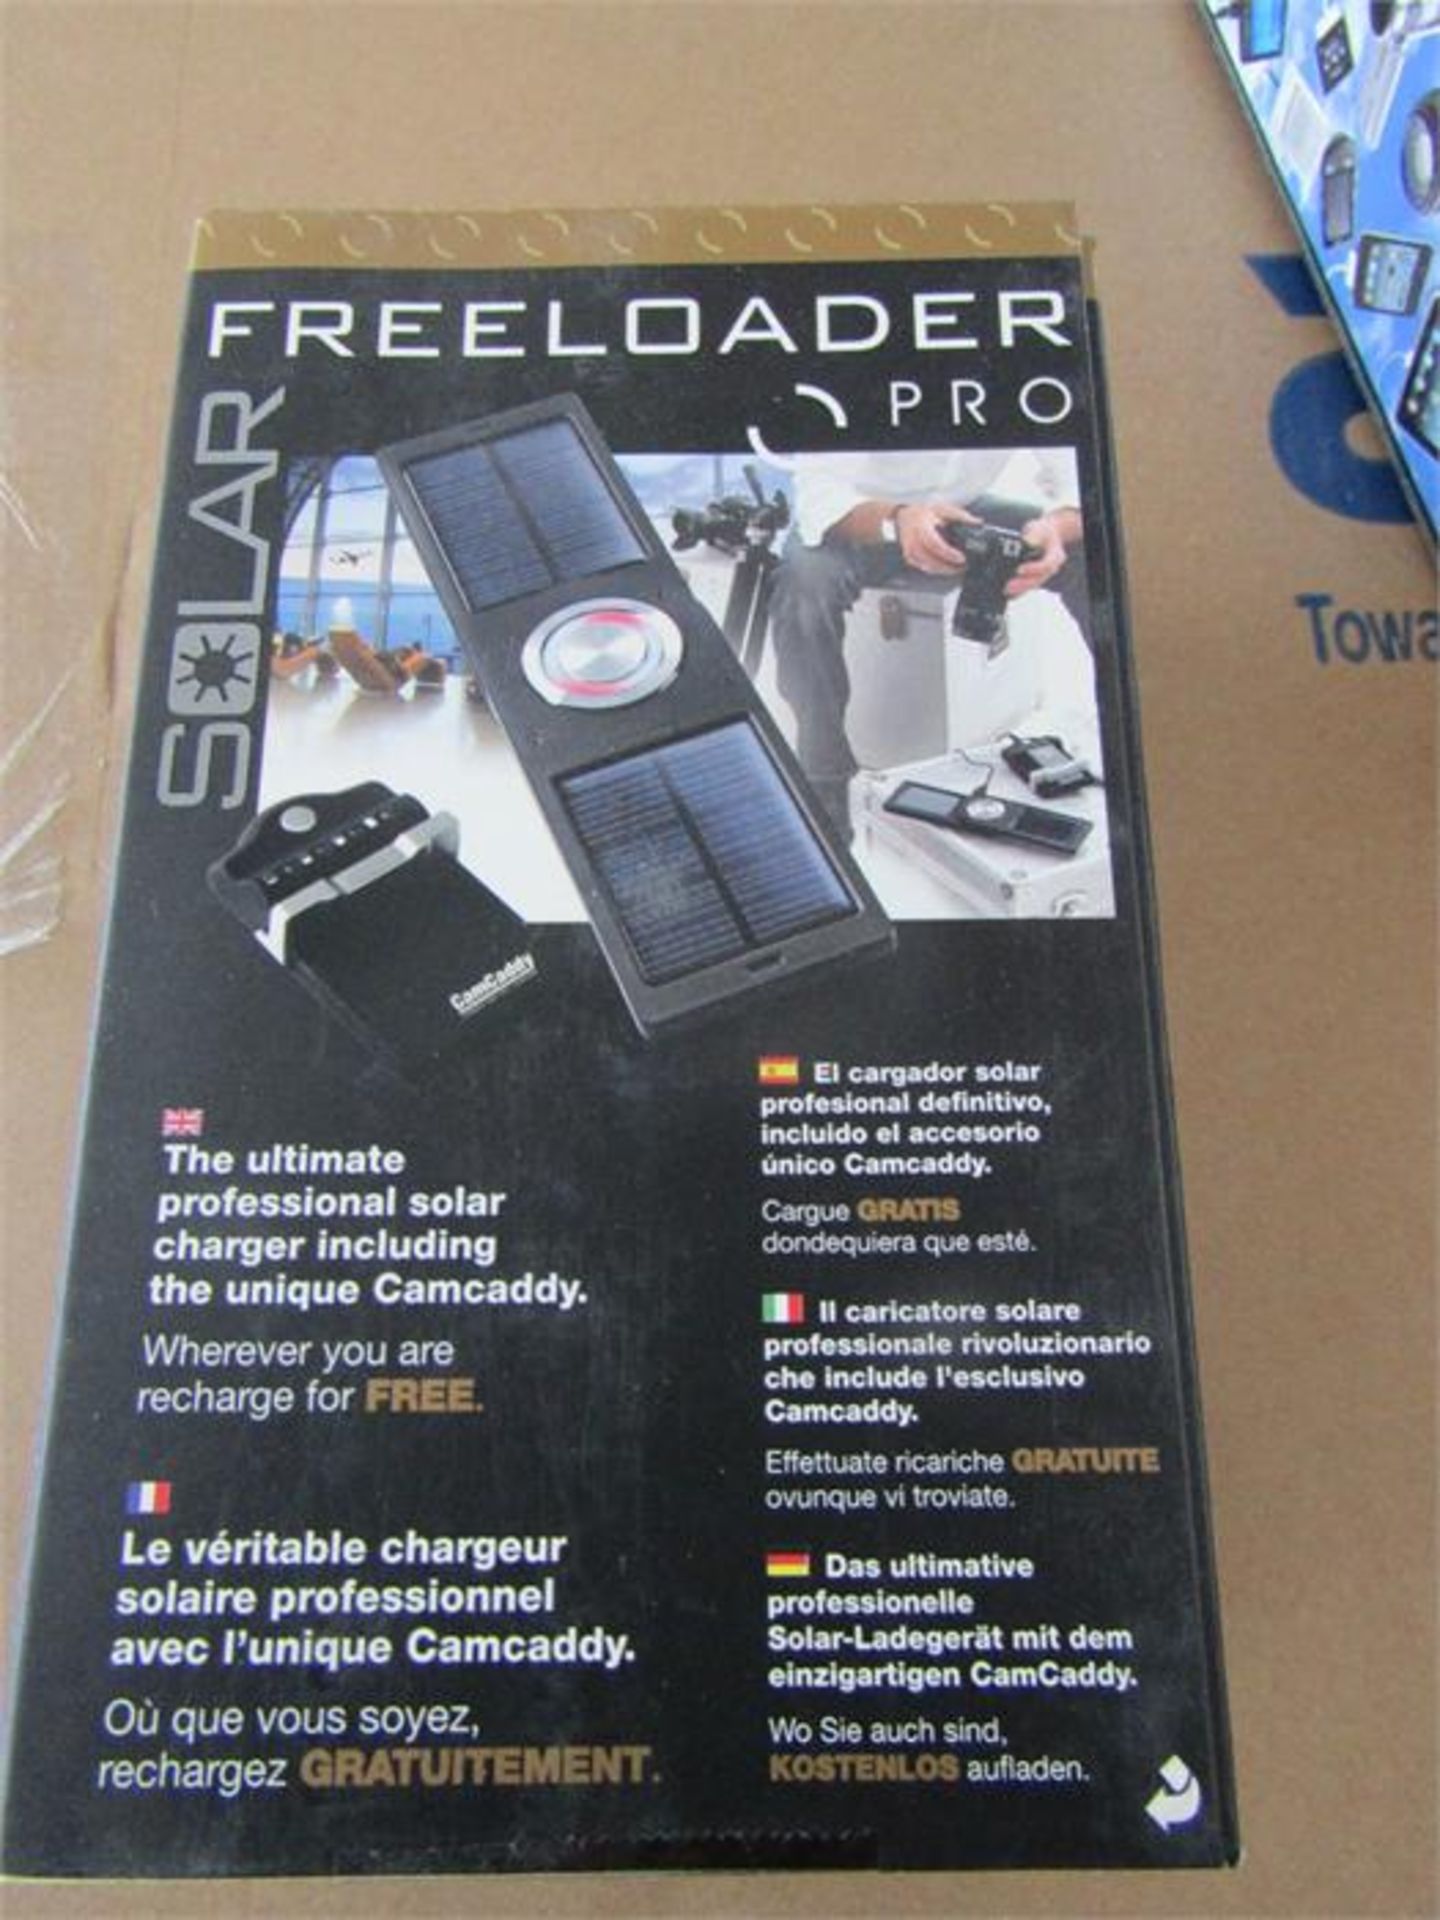 FreeLoader Pro Solar Powered Battery Charger - Image 3 of 3